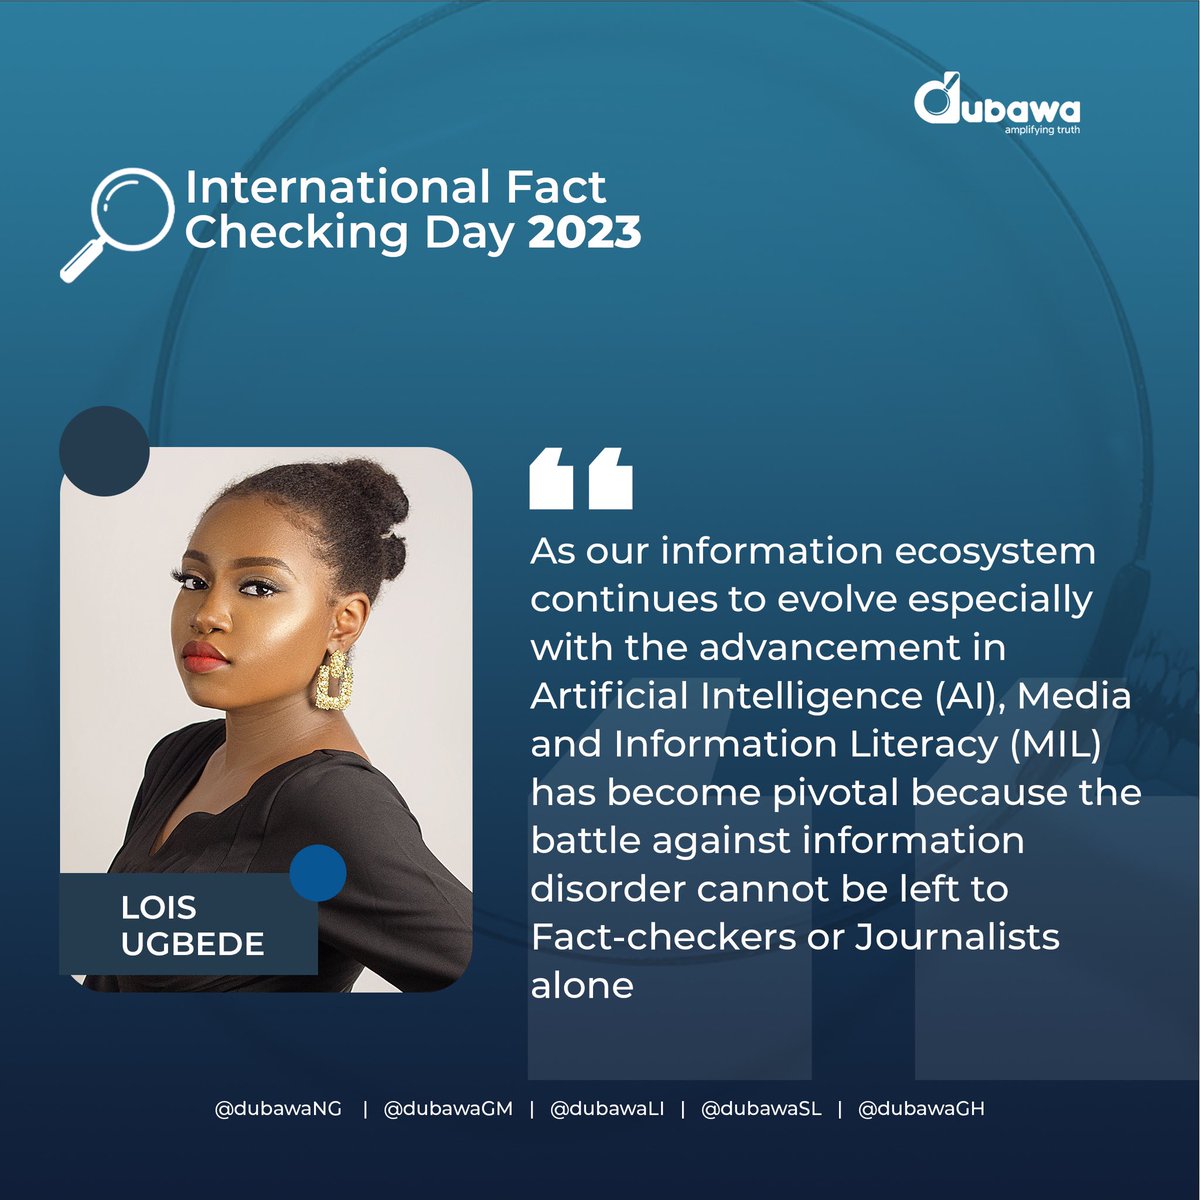 As we commemorate International Fact-checking Day, it is important we remind ourselves about the importance of fact-checking and MIL and the role we all have to play. #InternationalFactCheckingDay #FactsMatter #FactchekingIsEssential #DubawaChecks